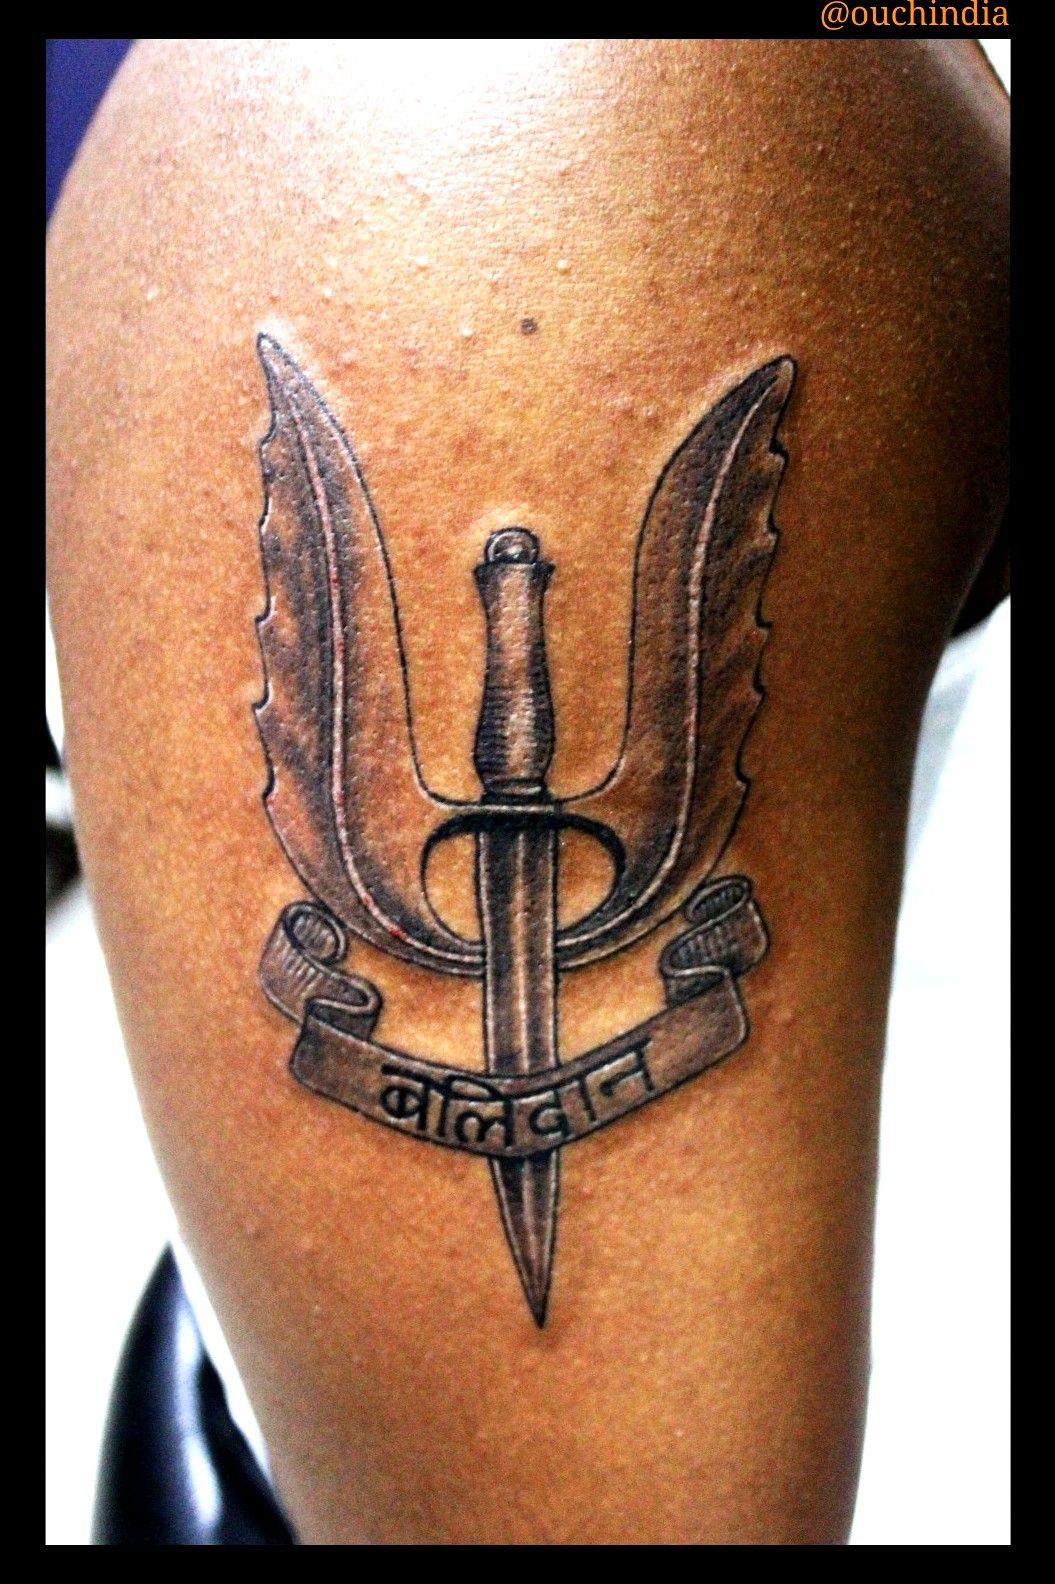 inkscripttattoos  Balidan badge is worn by Para special forces of Indian  Army This guy is a special body builder from others so as a tribute to him  added a dumbbell to